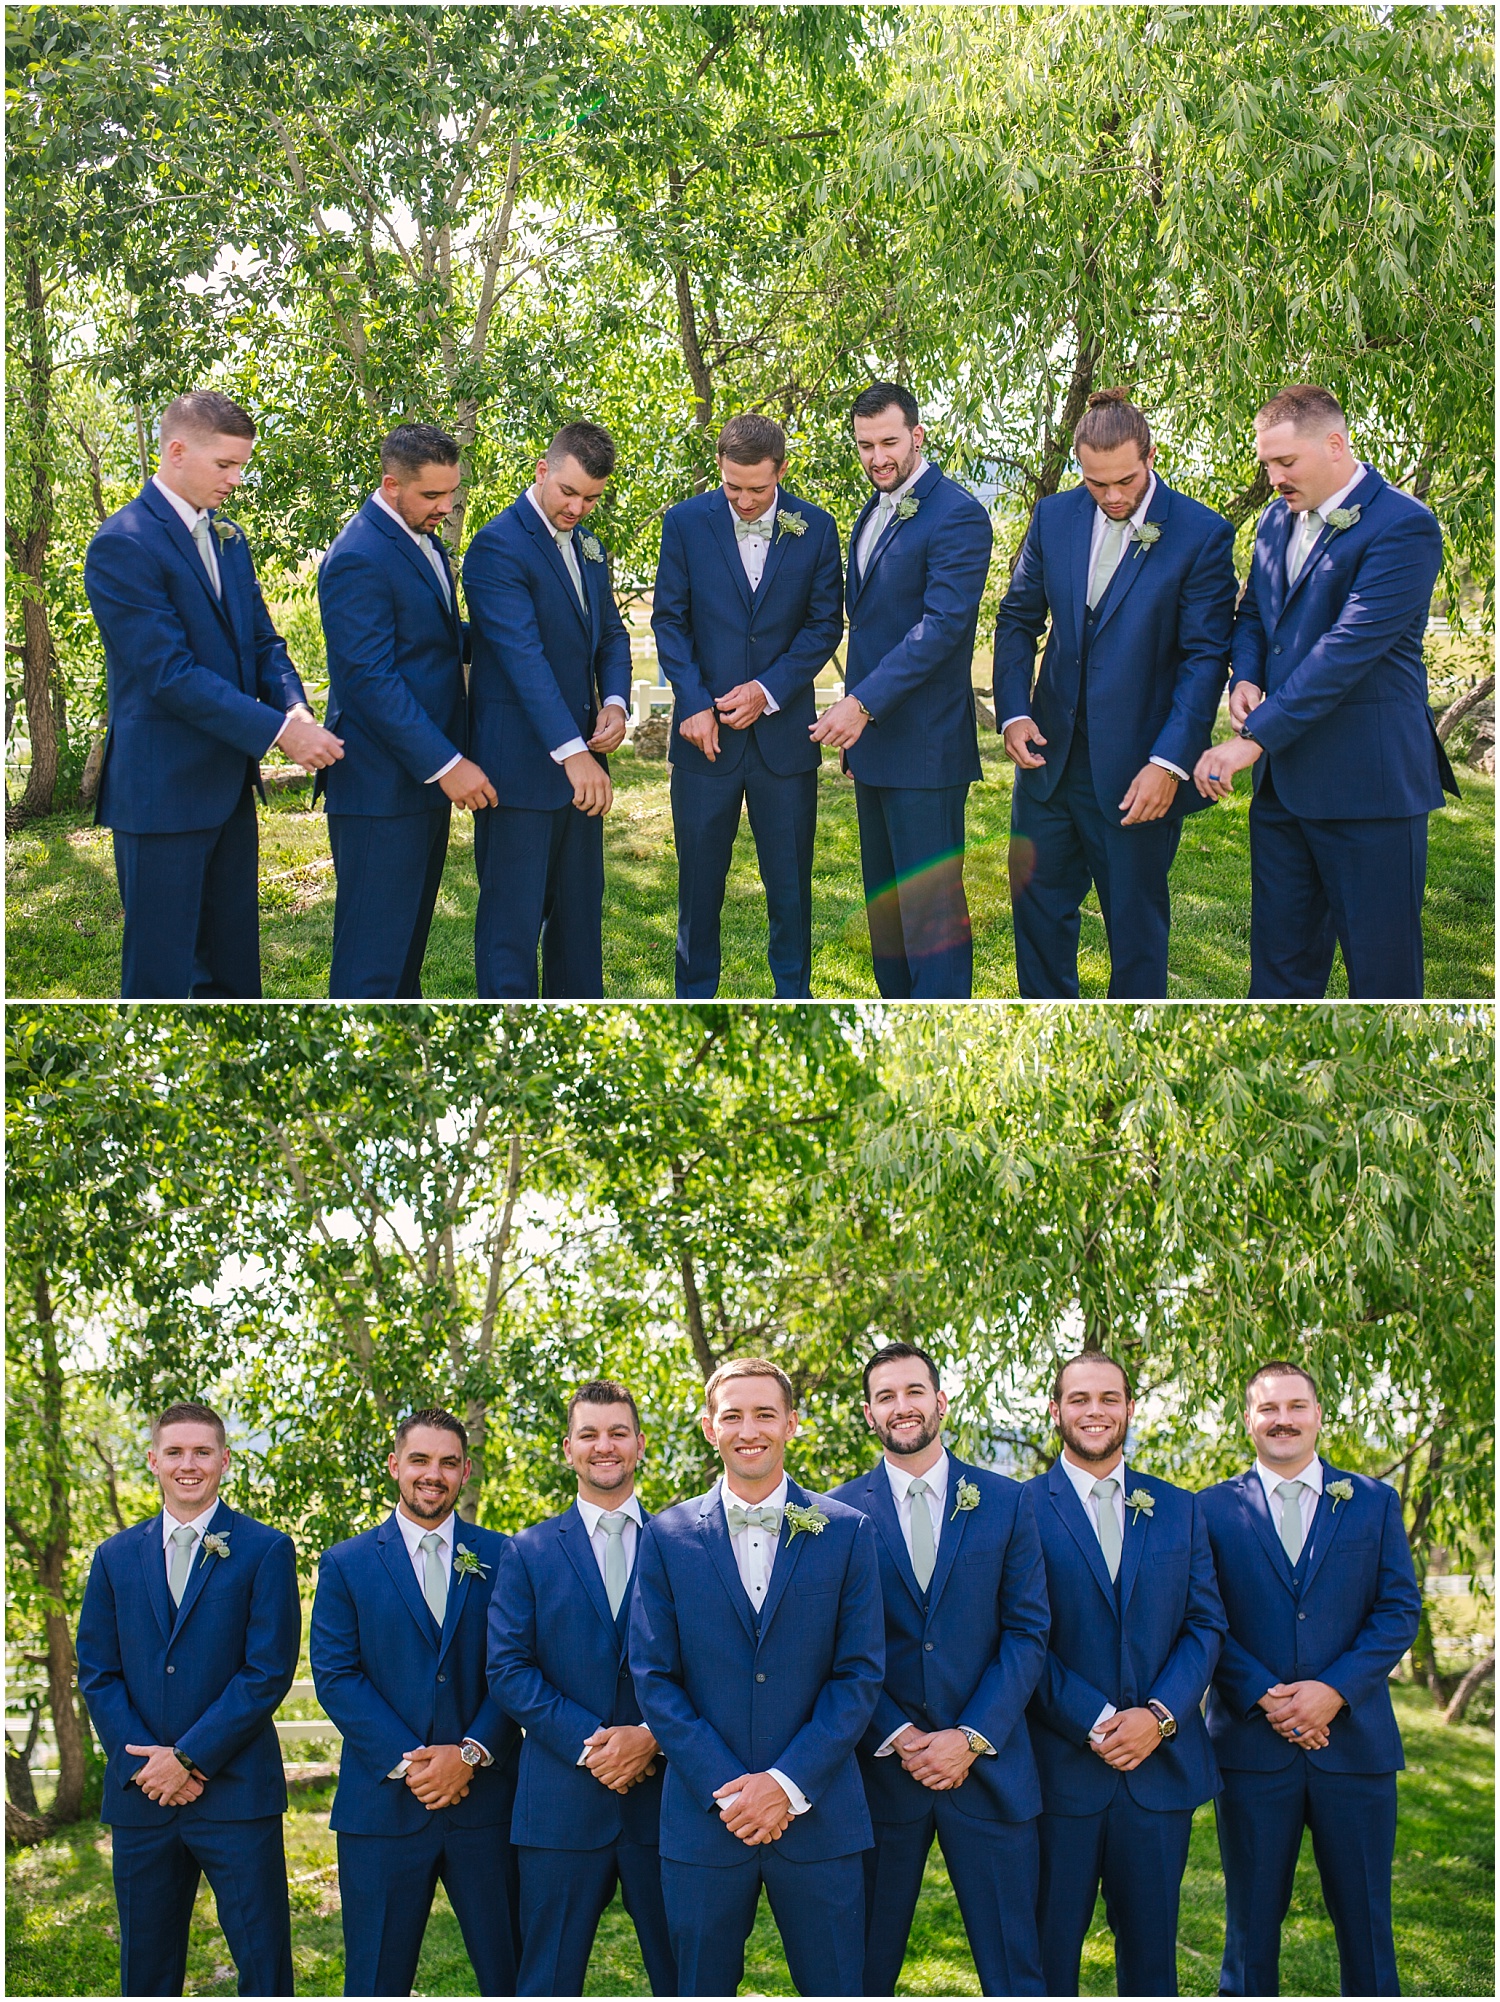 Groomsmen in navy suits and green bowties at Crooked Willow Farms wedding